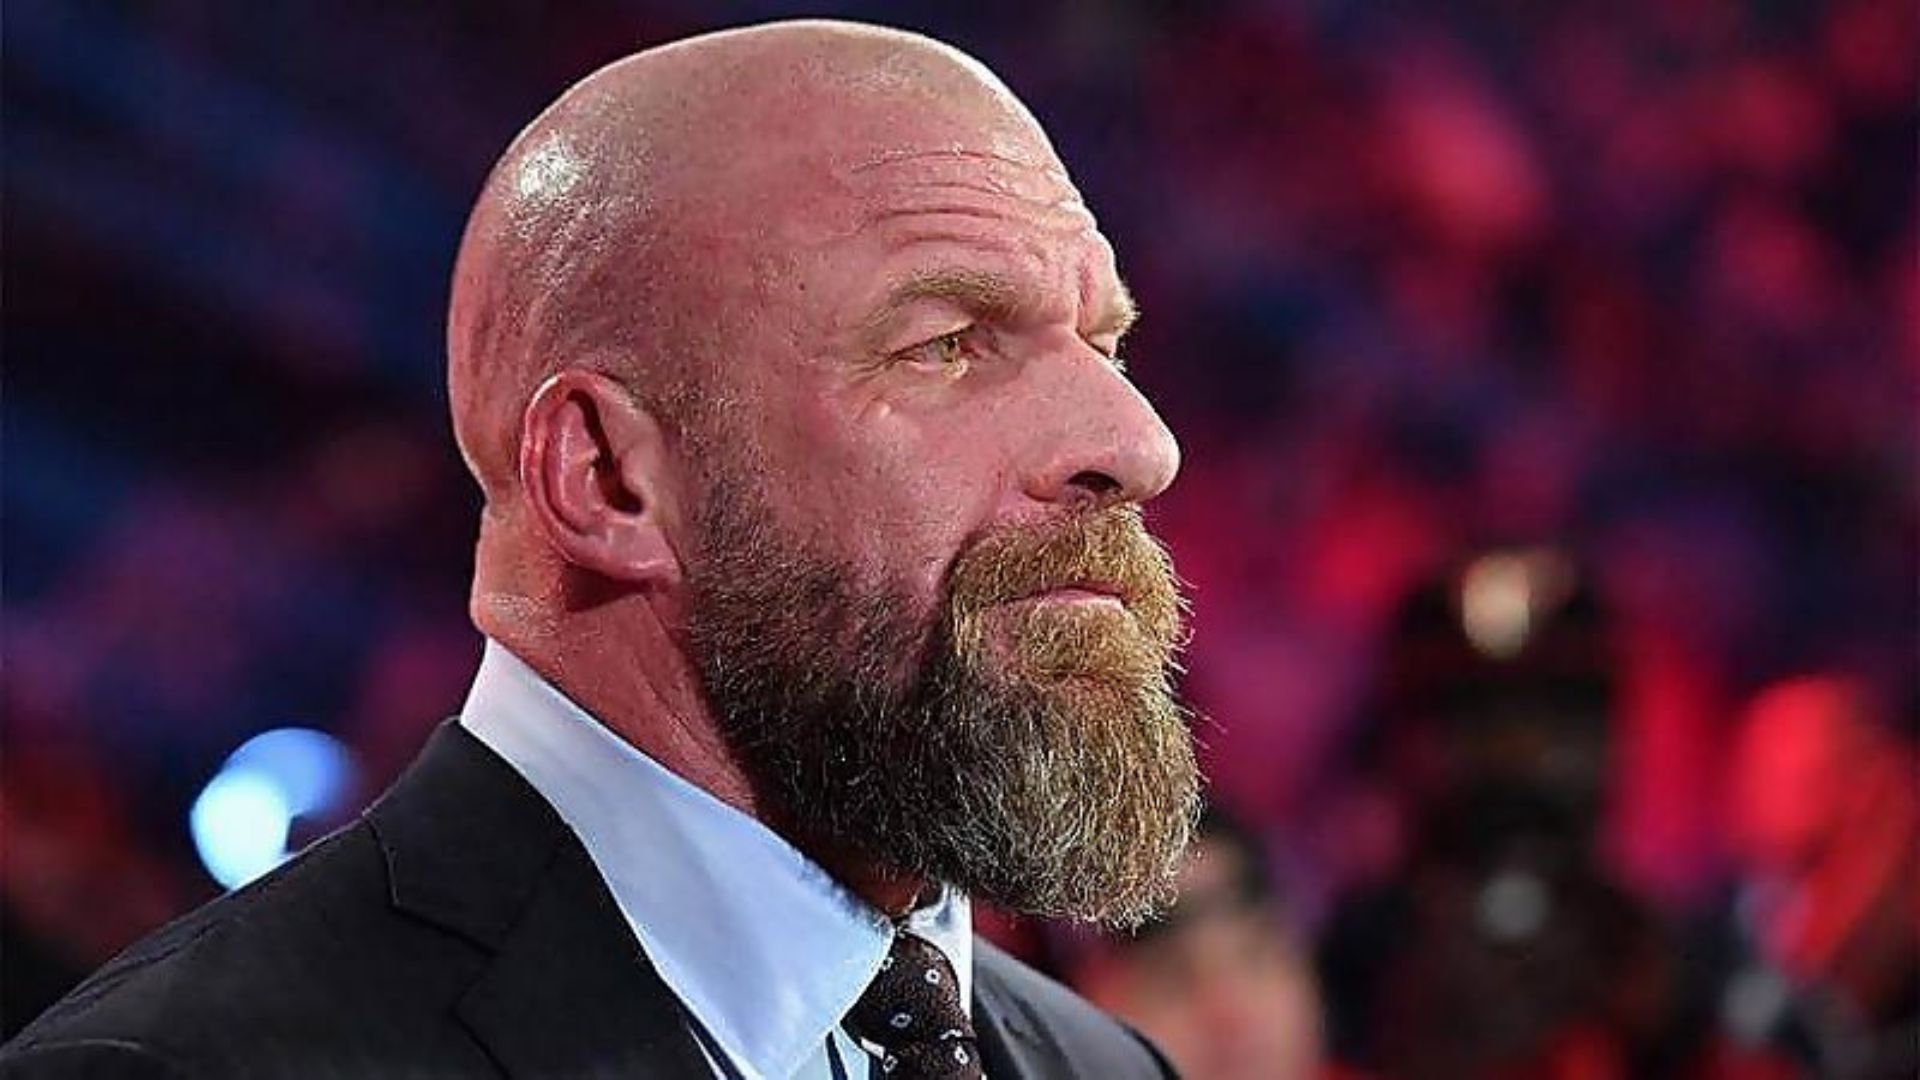 Triple H is the current Head of Creative for WWE